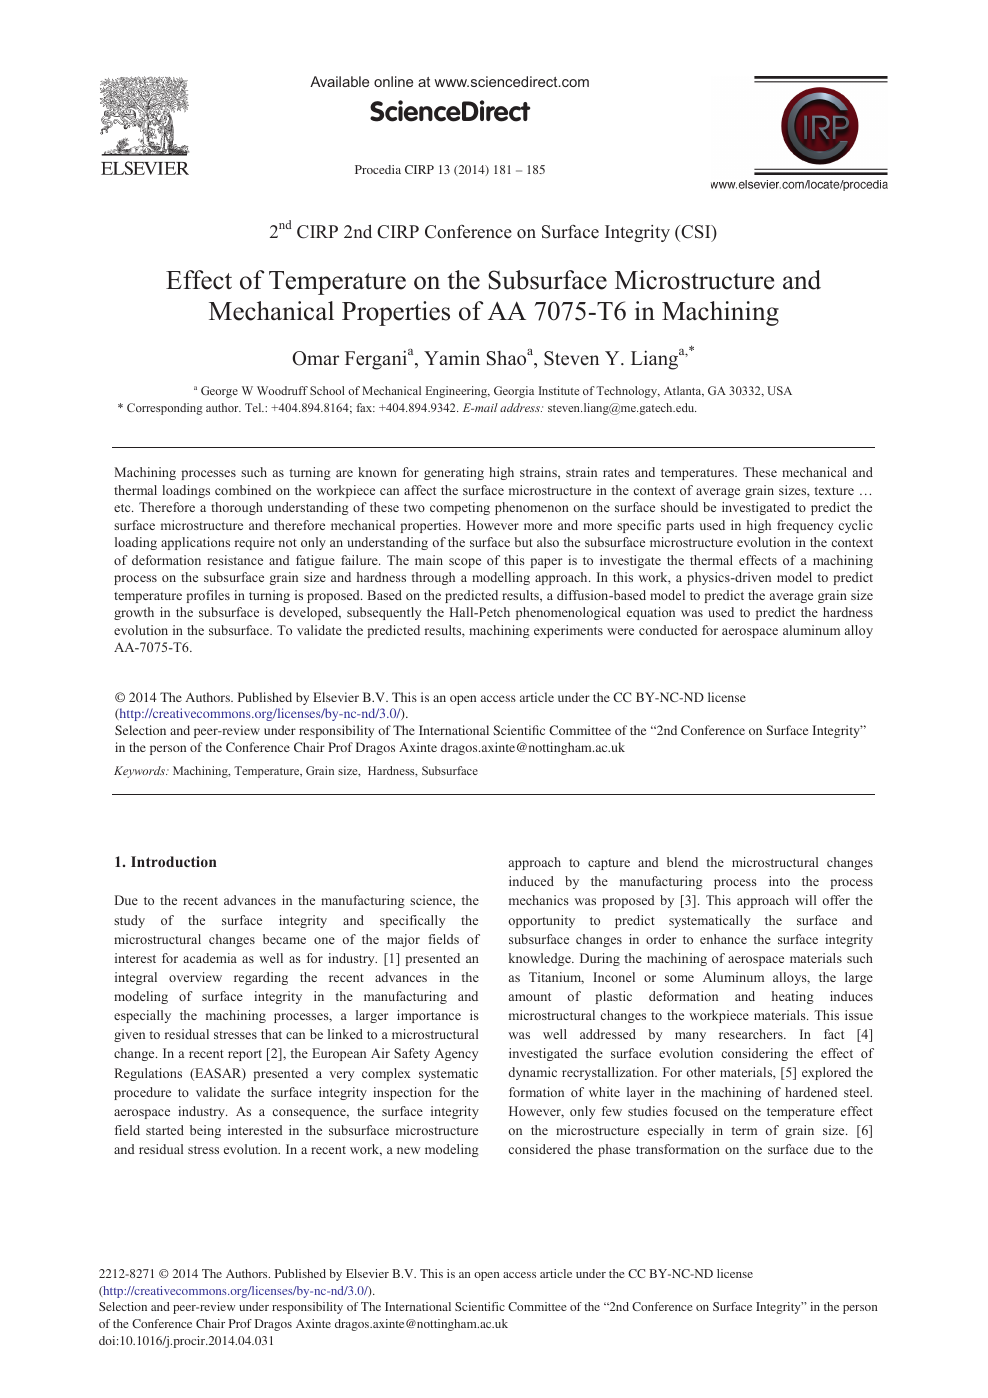 Effect Of Temperature On The Subsurface Microstructure And Mechanical Properties Of 7075 T6 In Machining Topic Of Research Paper In Materials Engineering Download Scholarly Article Pdf And Read For Free On